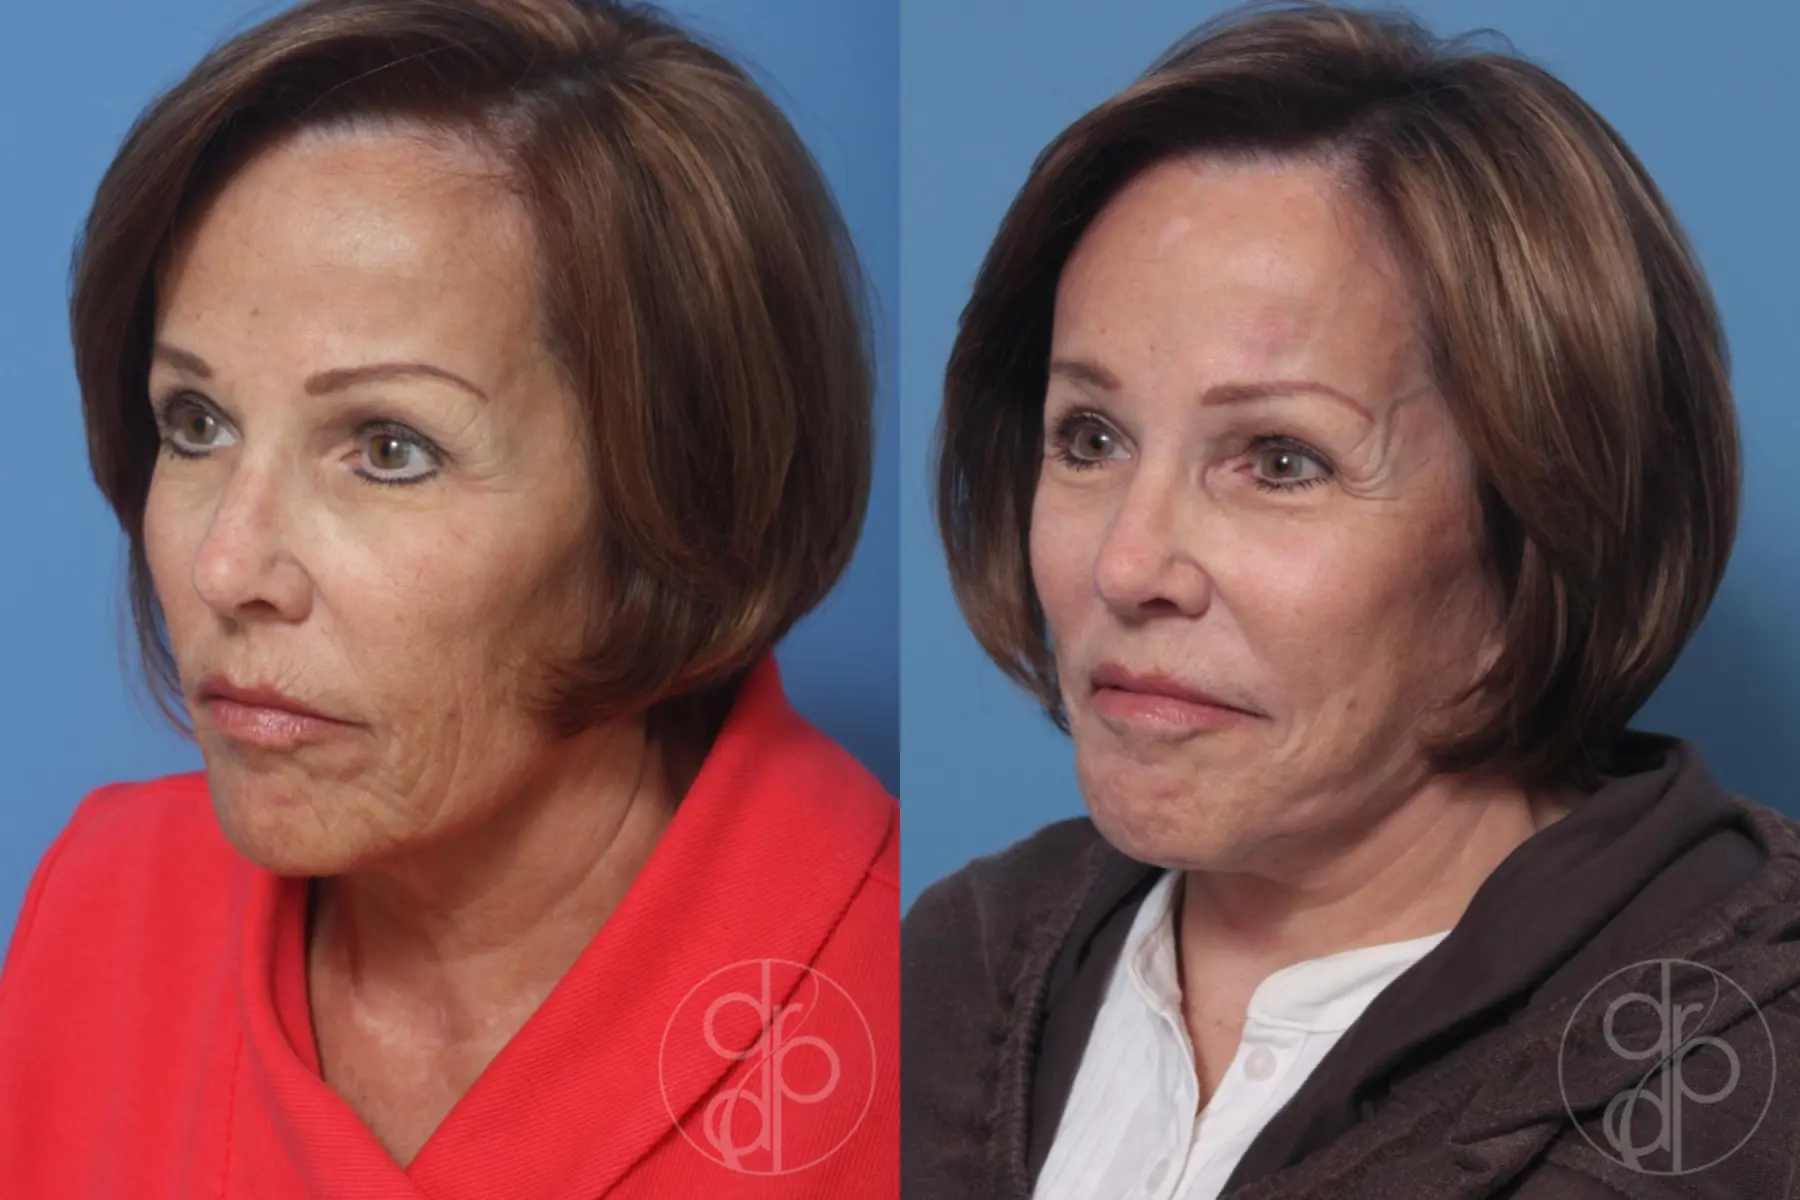 patient 10505 facelift before and after result - Before and After 2